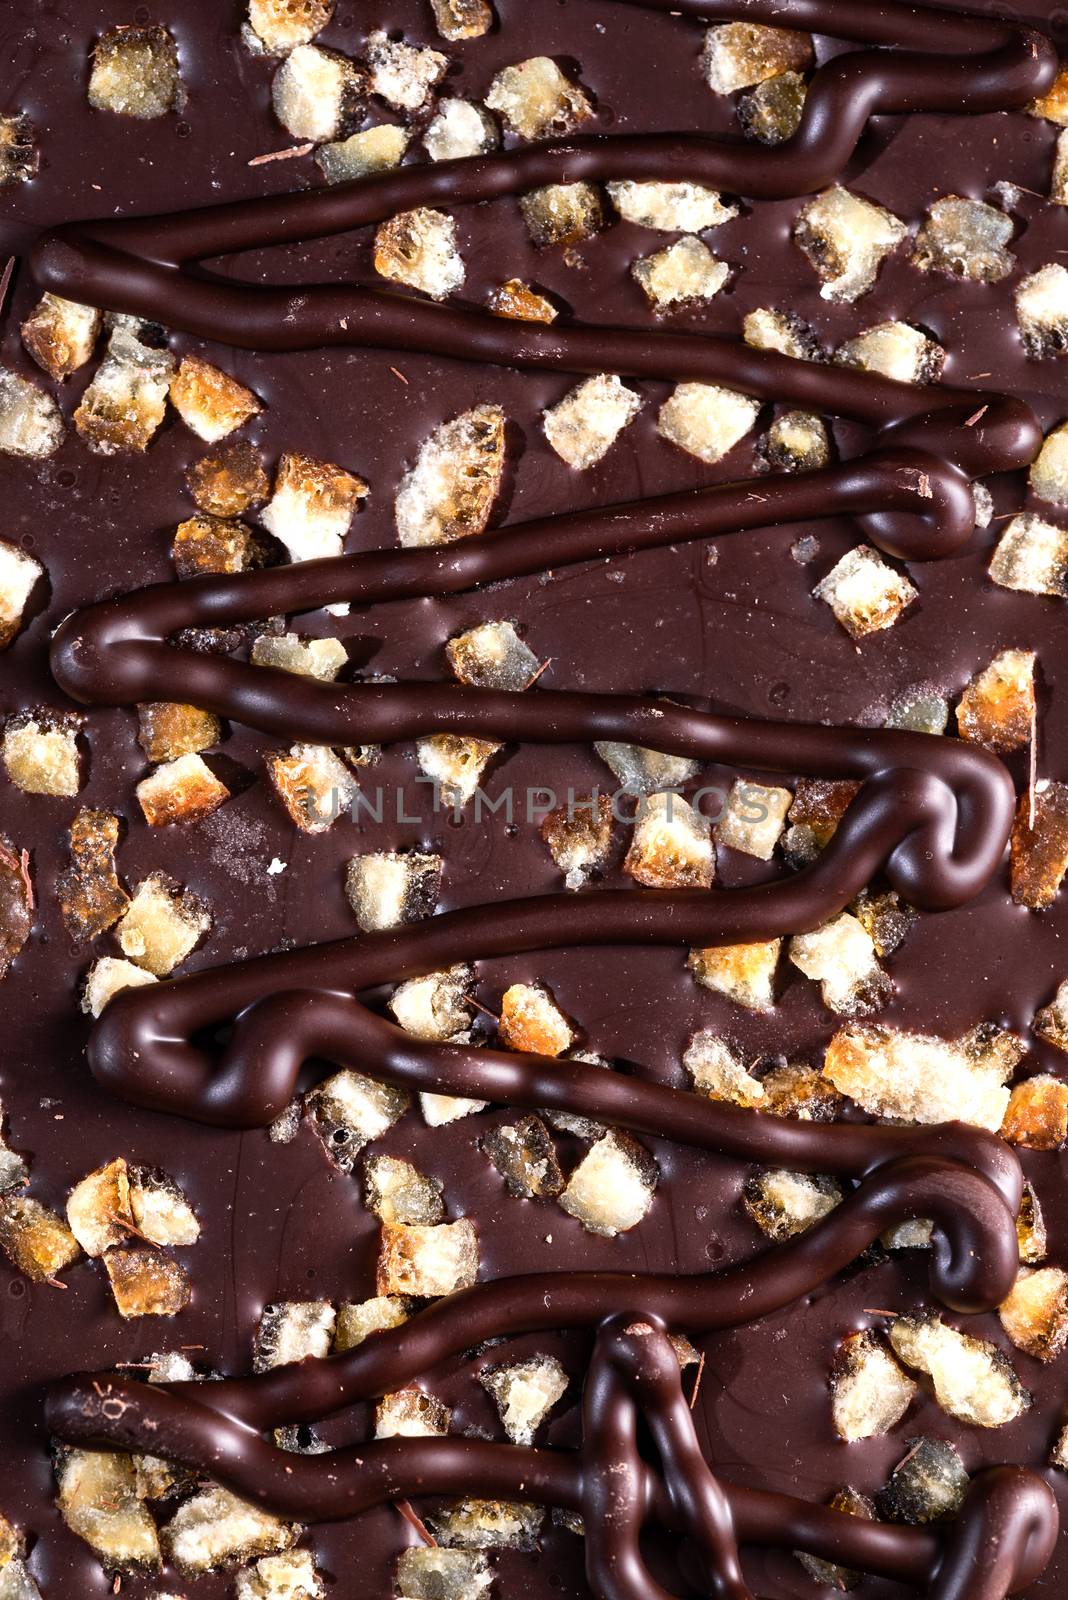 Chocolate Bar Topped with Freeze - Dried Fruits. Top Down Closeup View.